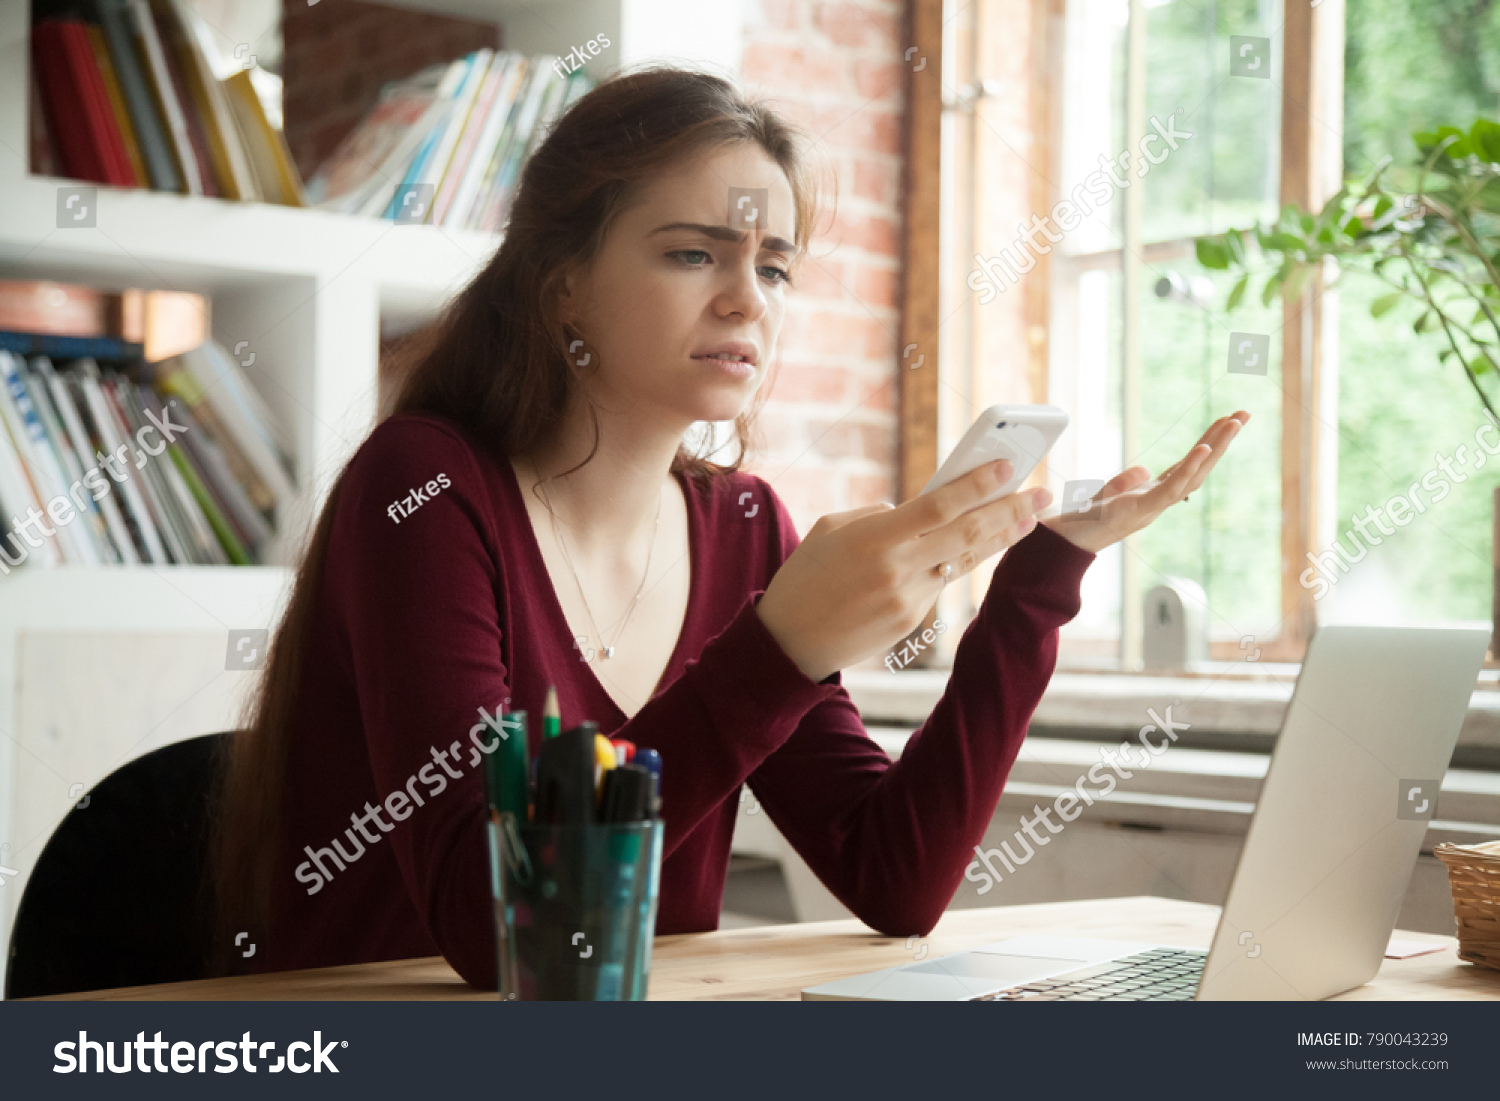 Frustrated woman having problem with not working smart phone sitting at home office desk, indignant confused businesswoman annoyed with discharged or broken cell, received bad news in mobile message #790043239